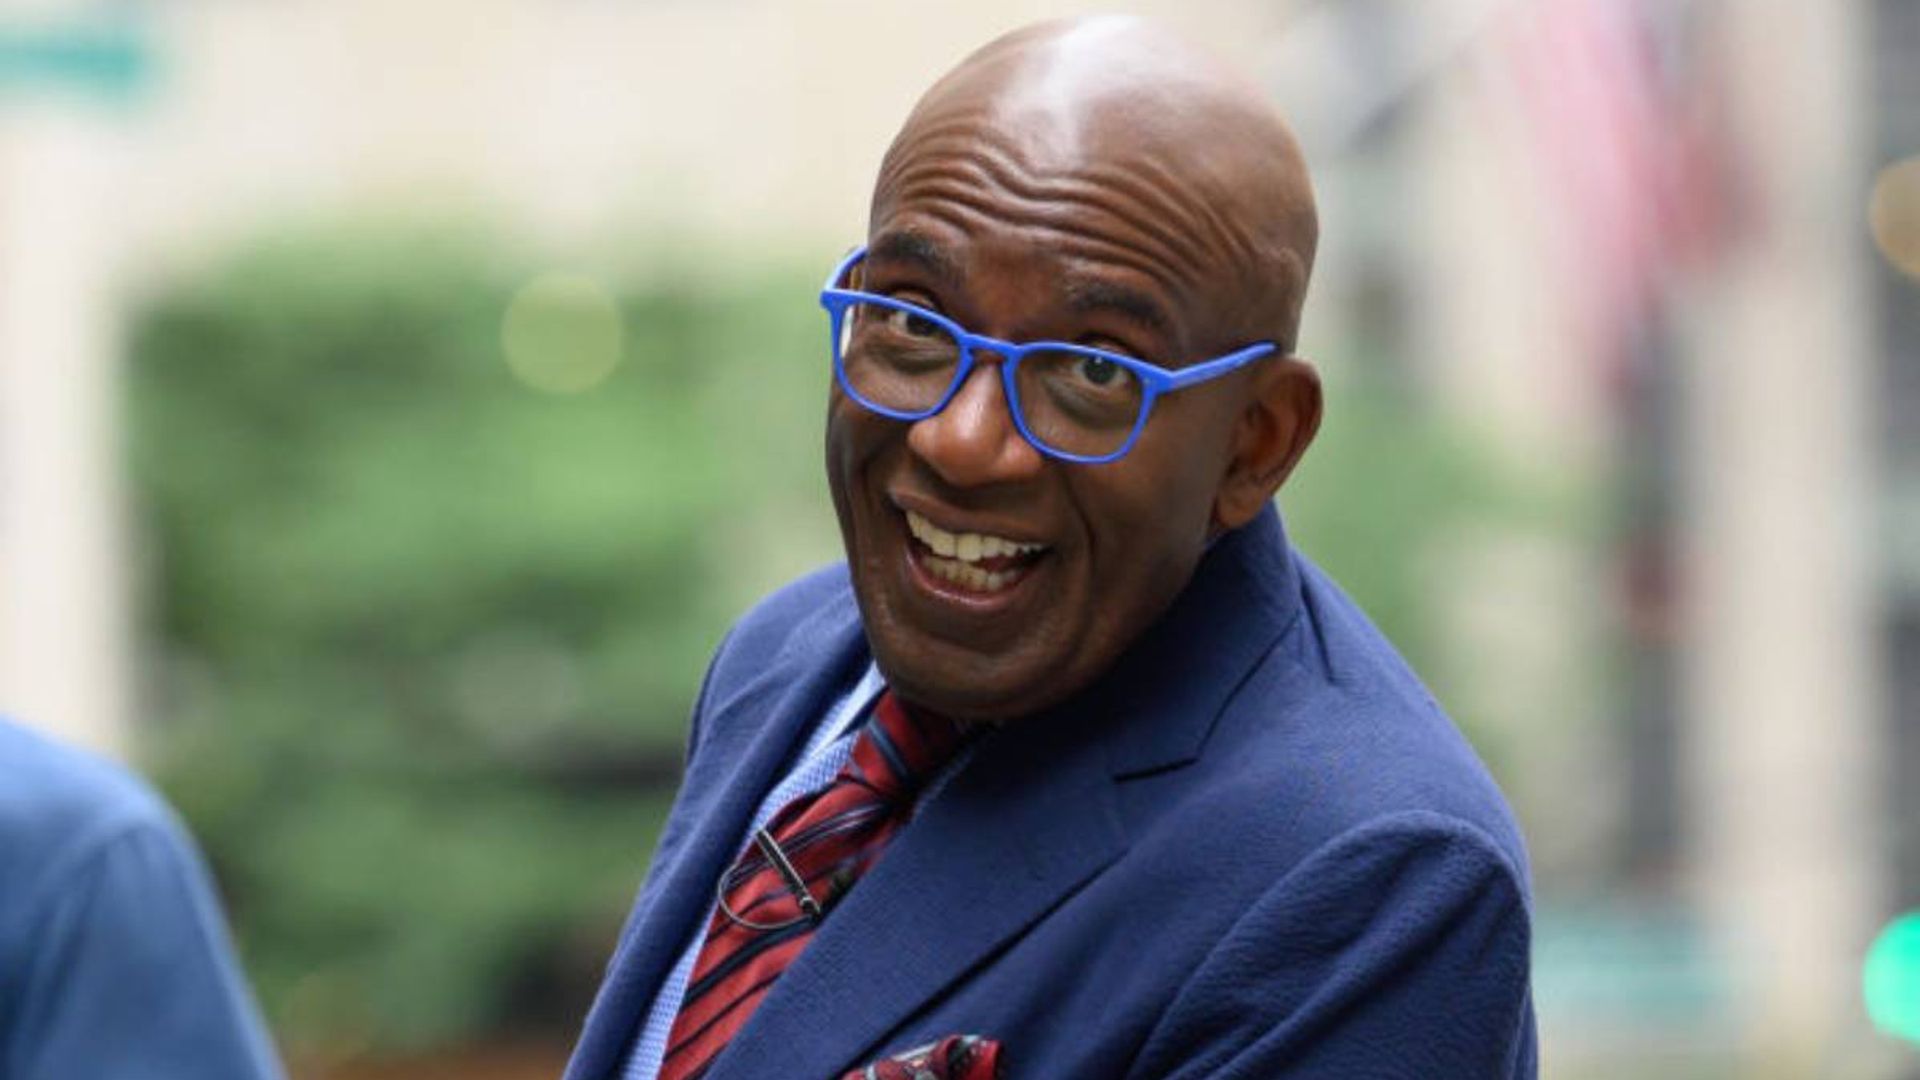 Today's Al Roker leaves fans in disbelief with major change to